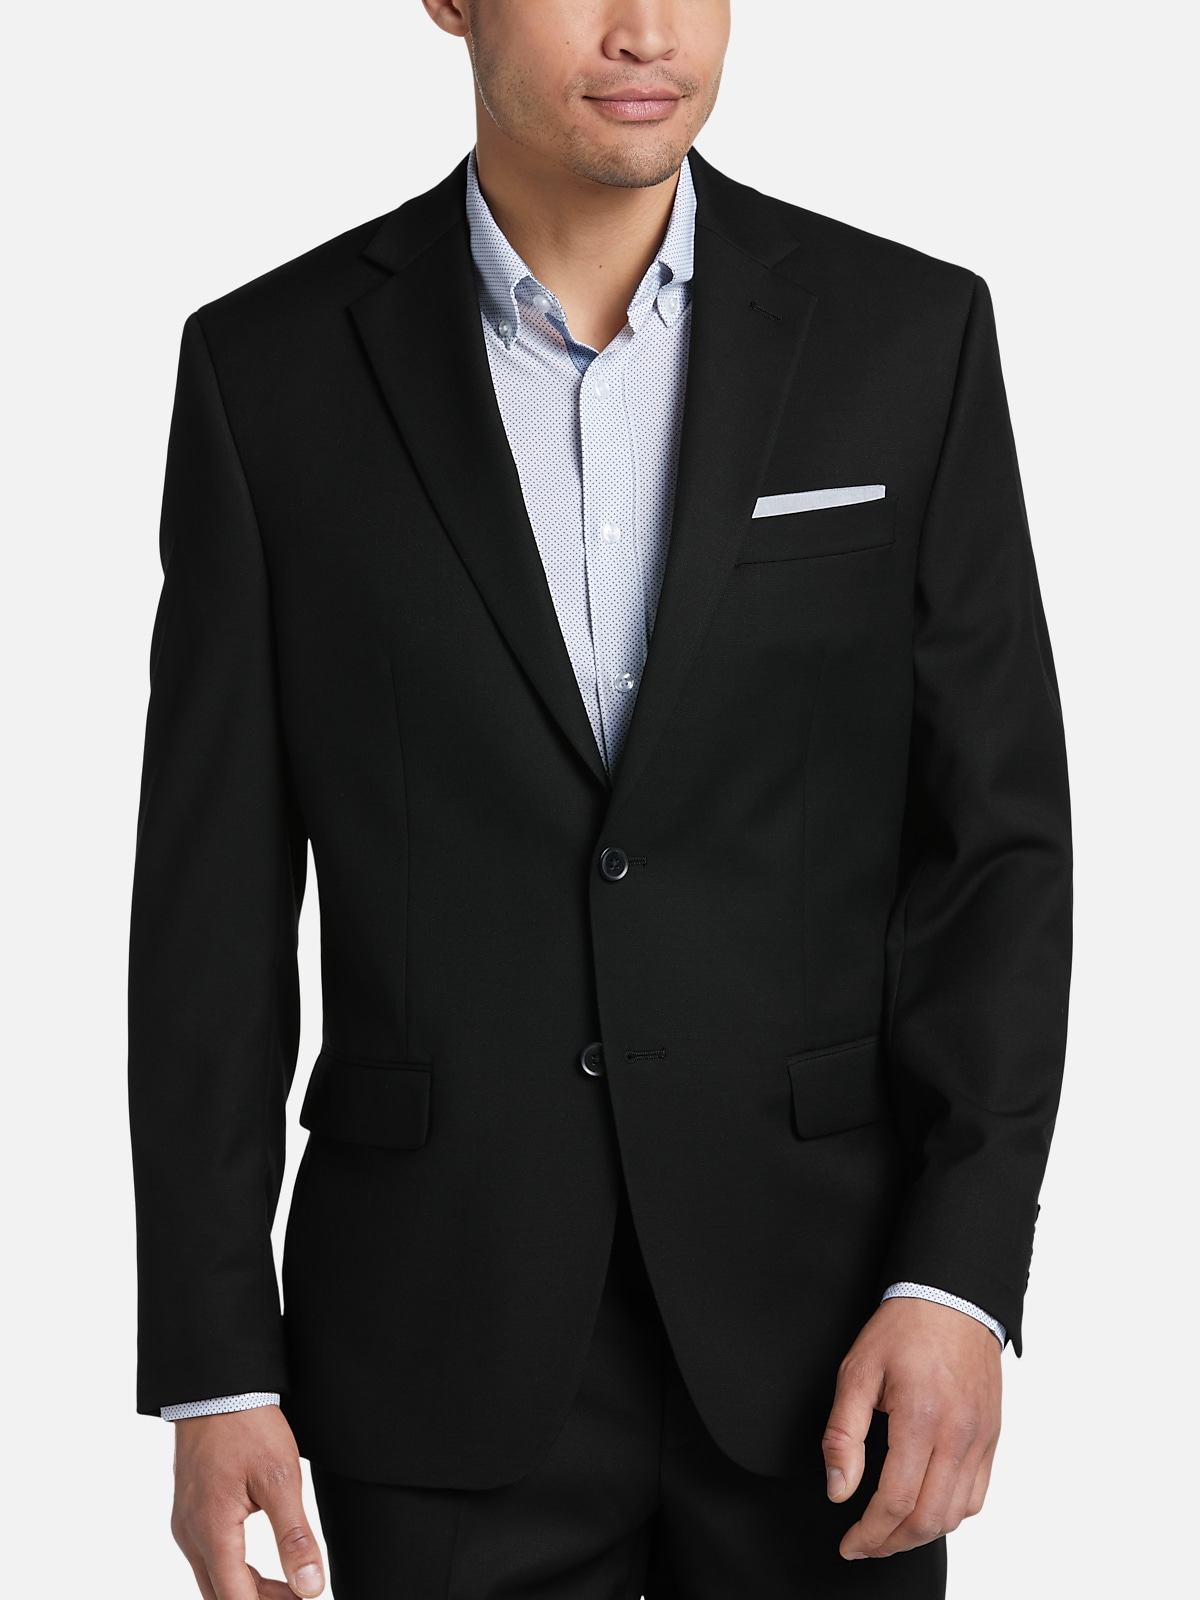 https://image.menswearhouse.com/is/image/TMW/TMW_3V4H_02_MICHAEL_STRAHAN_SUIT_SEPARATE_JACKETS_BLACK_SOLID_MAIN?imPolicy=pdp-zoom-mob